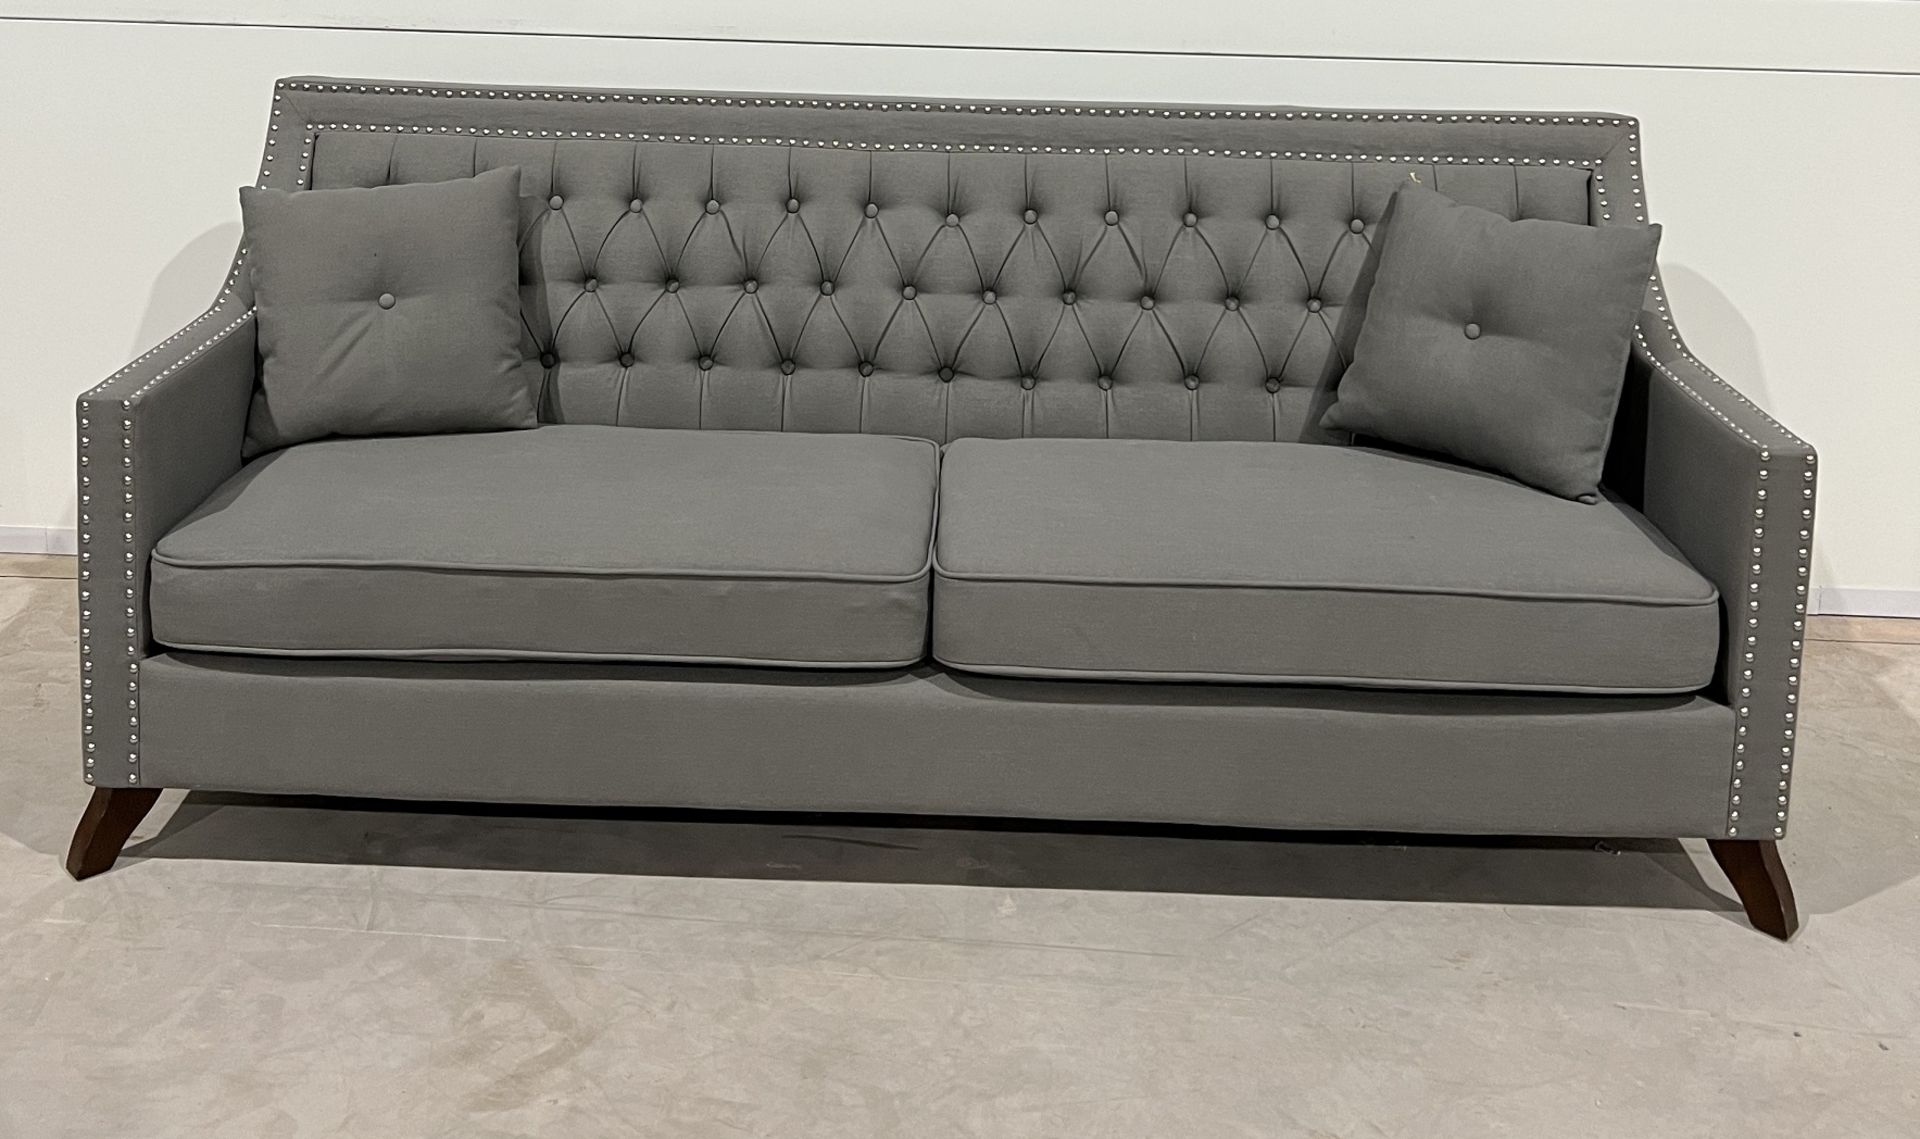 Chatsworth Grey Plush Fabric Sofa Offering A Decidedly Modern Take On The Classic Chesterfield